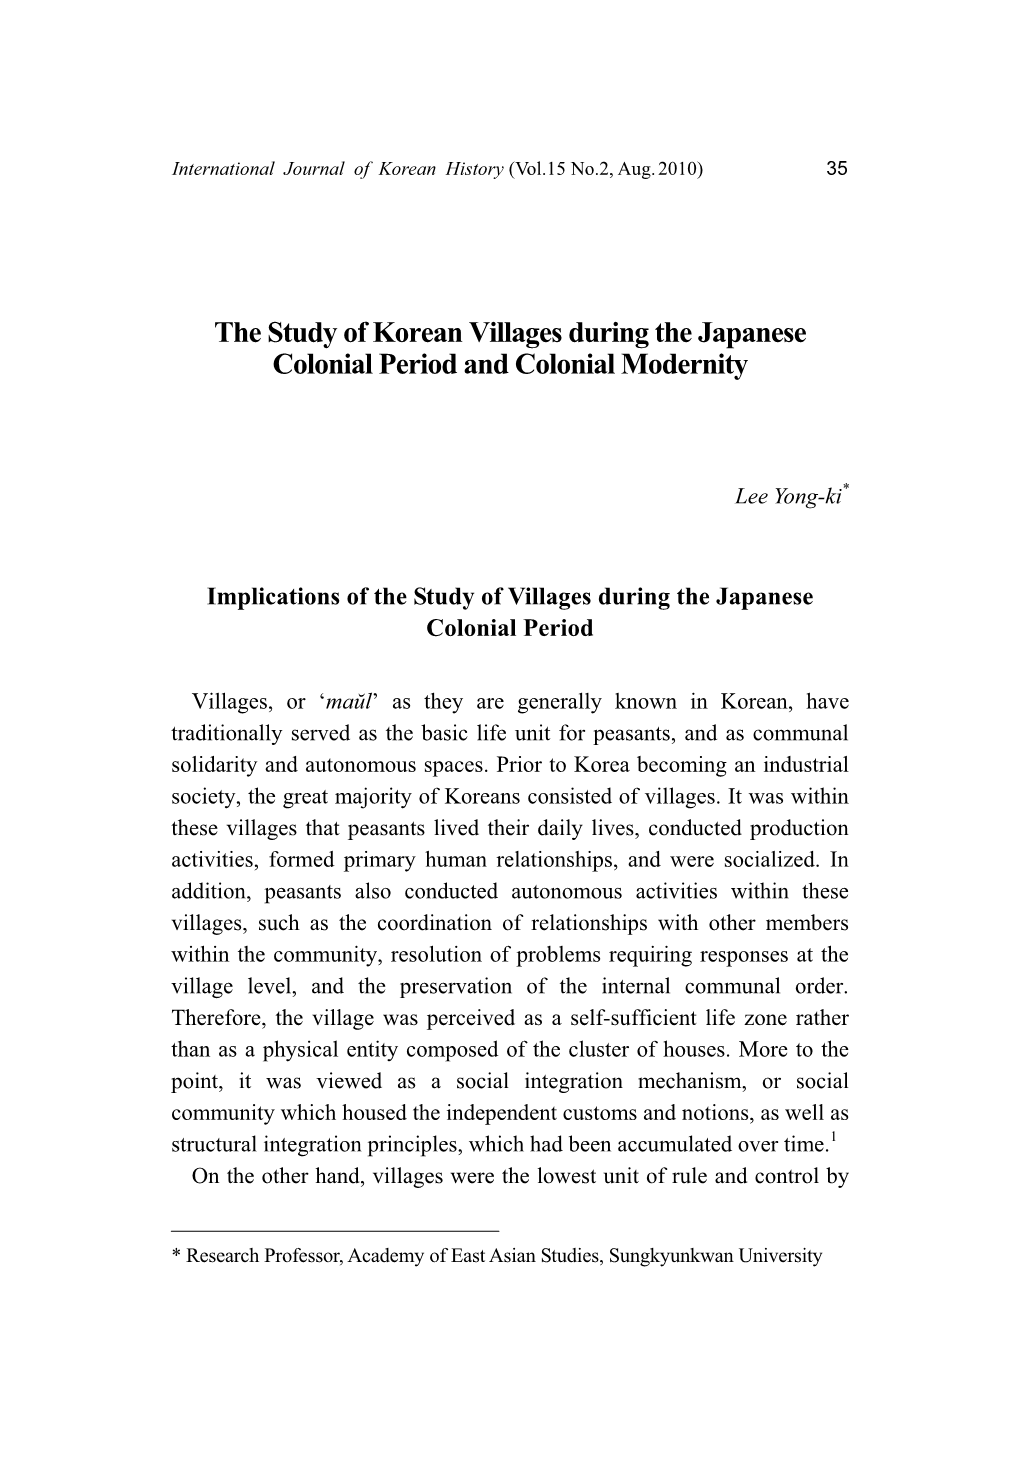 The Study of Korean Villages During the Japanese Colonial Period and Colonial Modernity